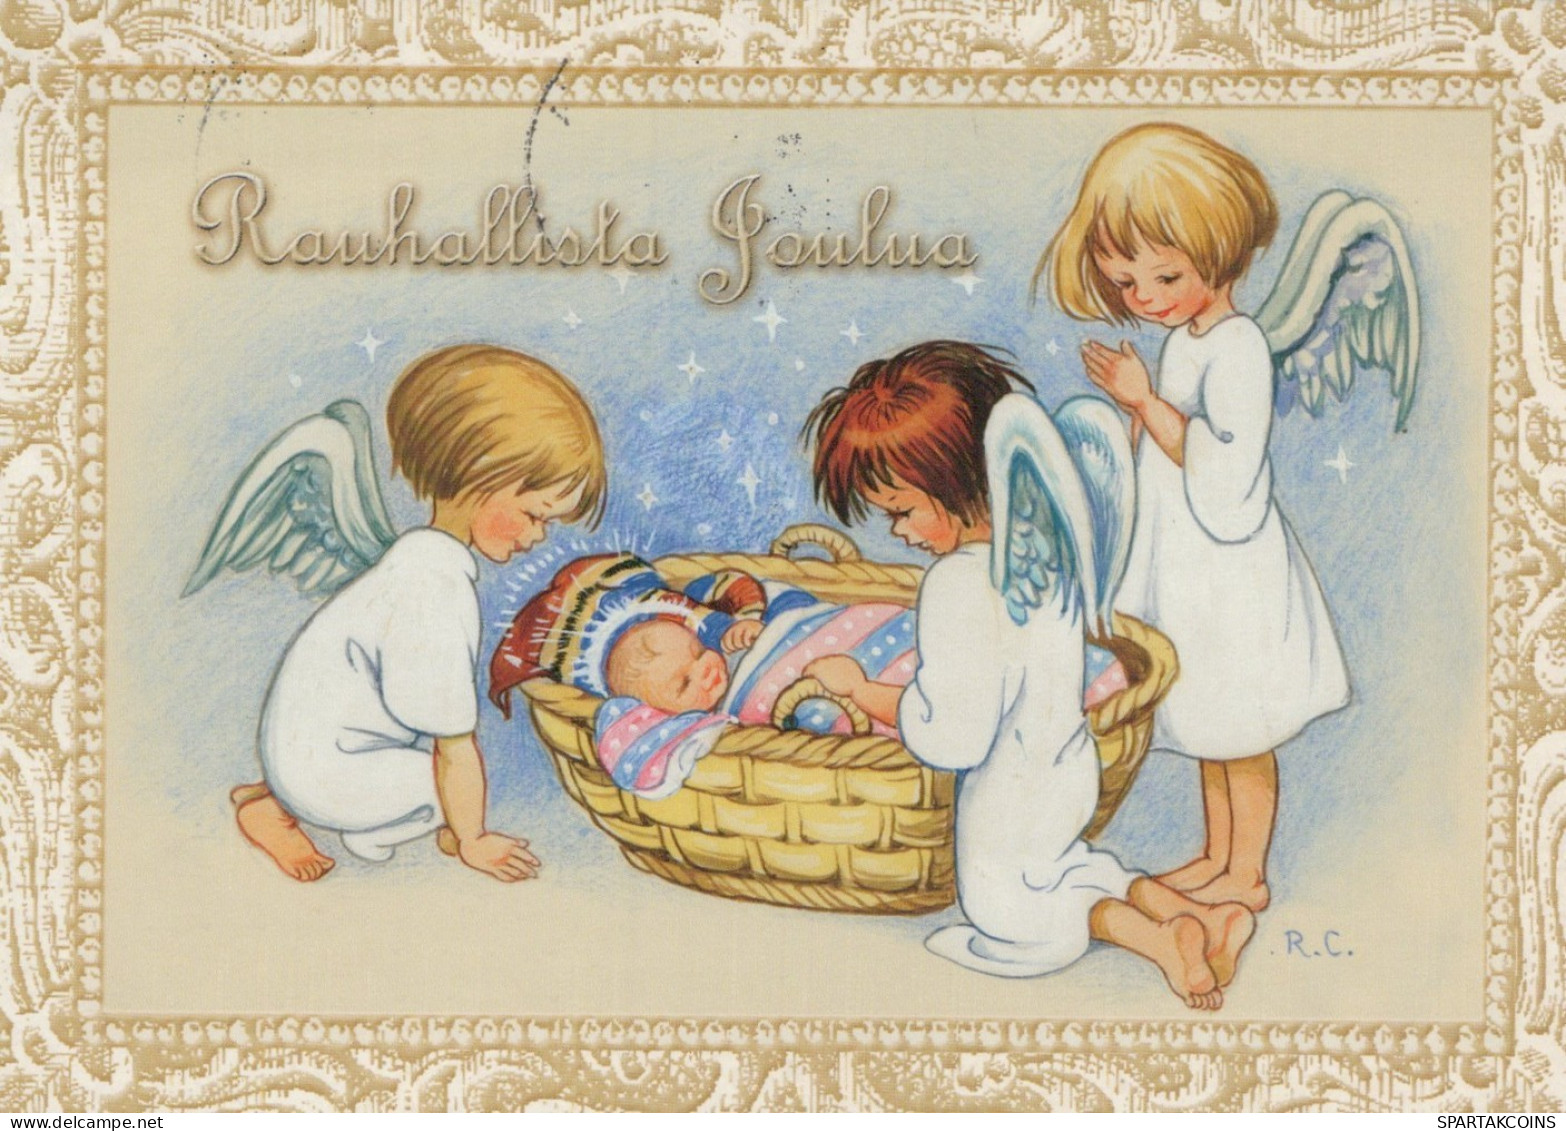 ANGELO Buon Anno Natale Vintage Cartolina CPSM #PAH762.IT - Angels